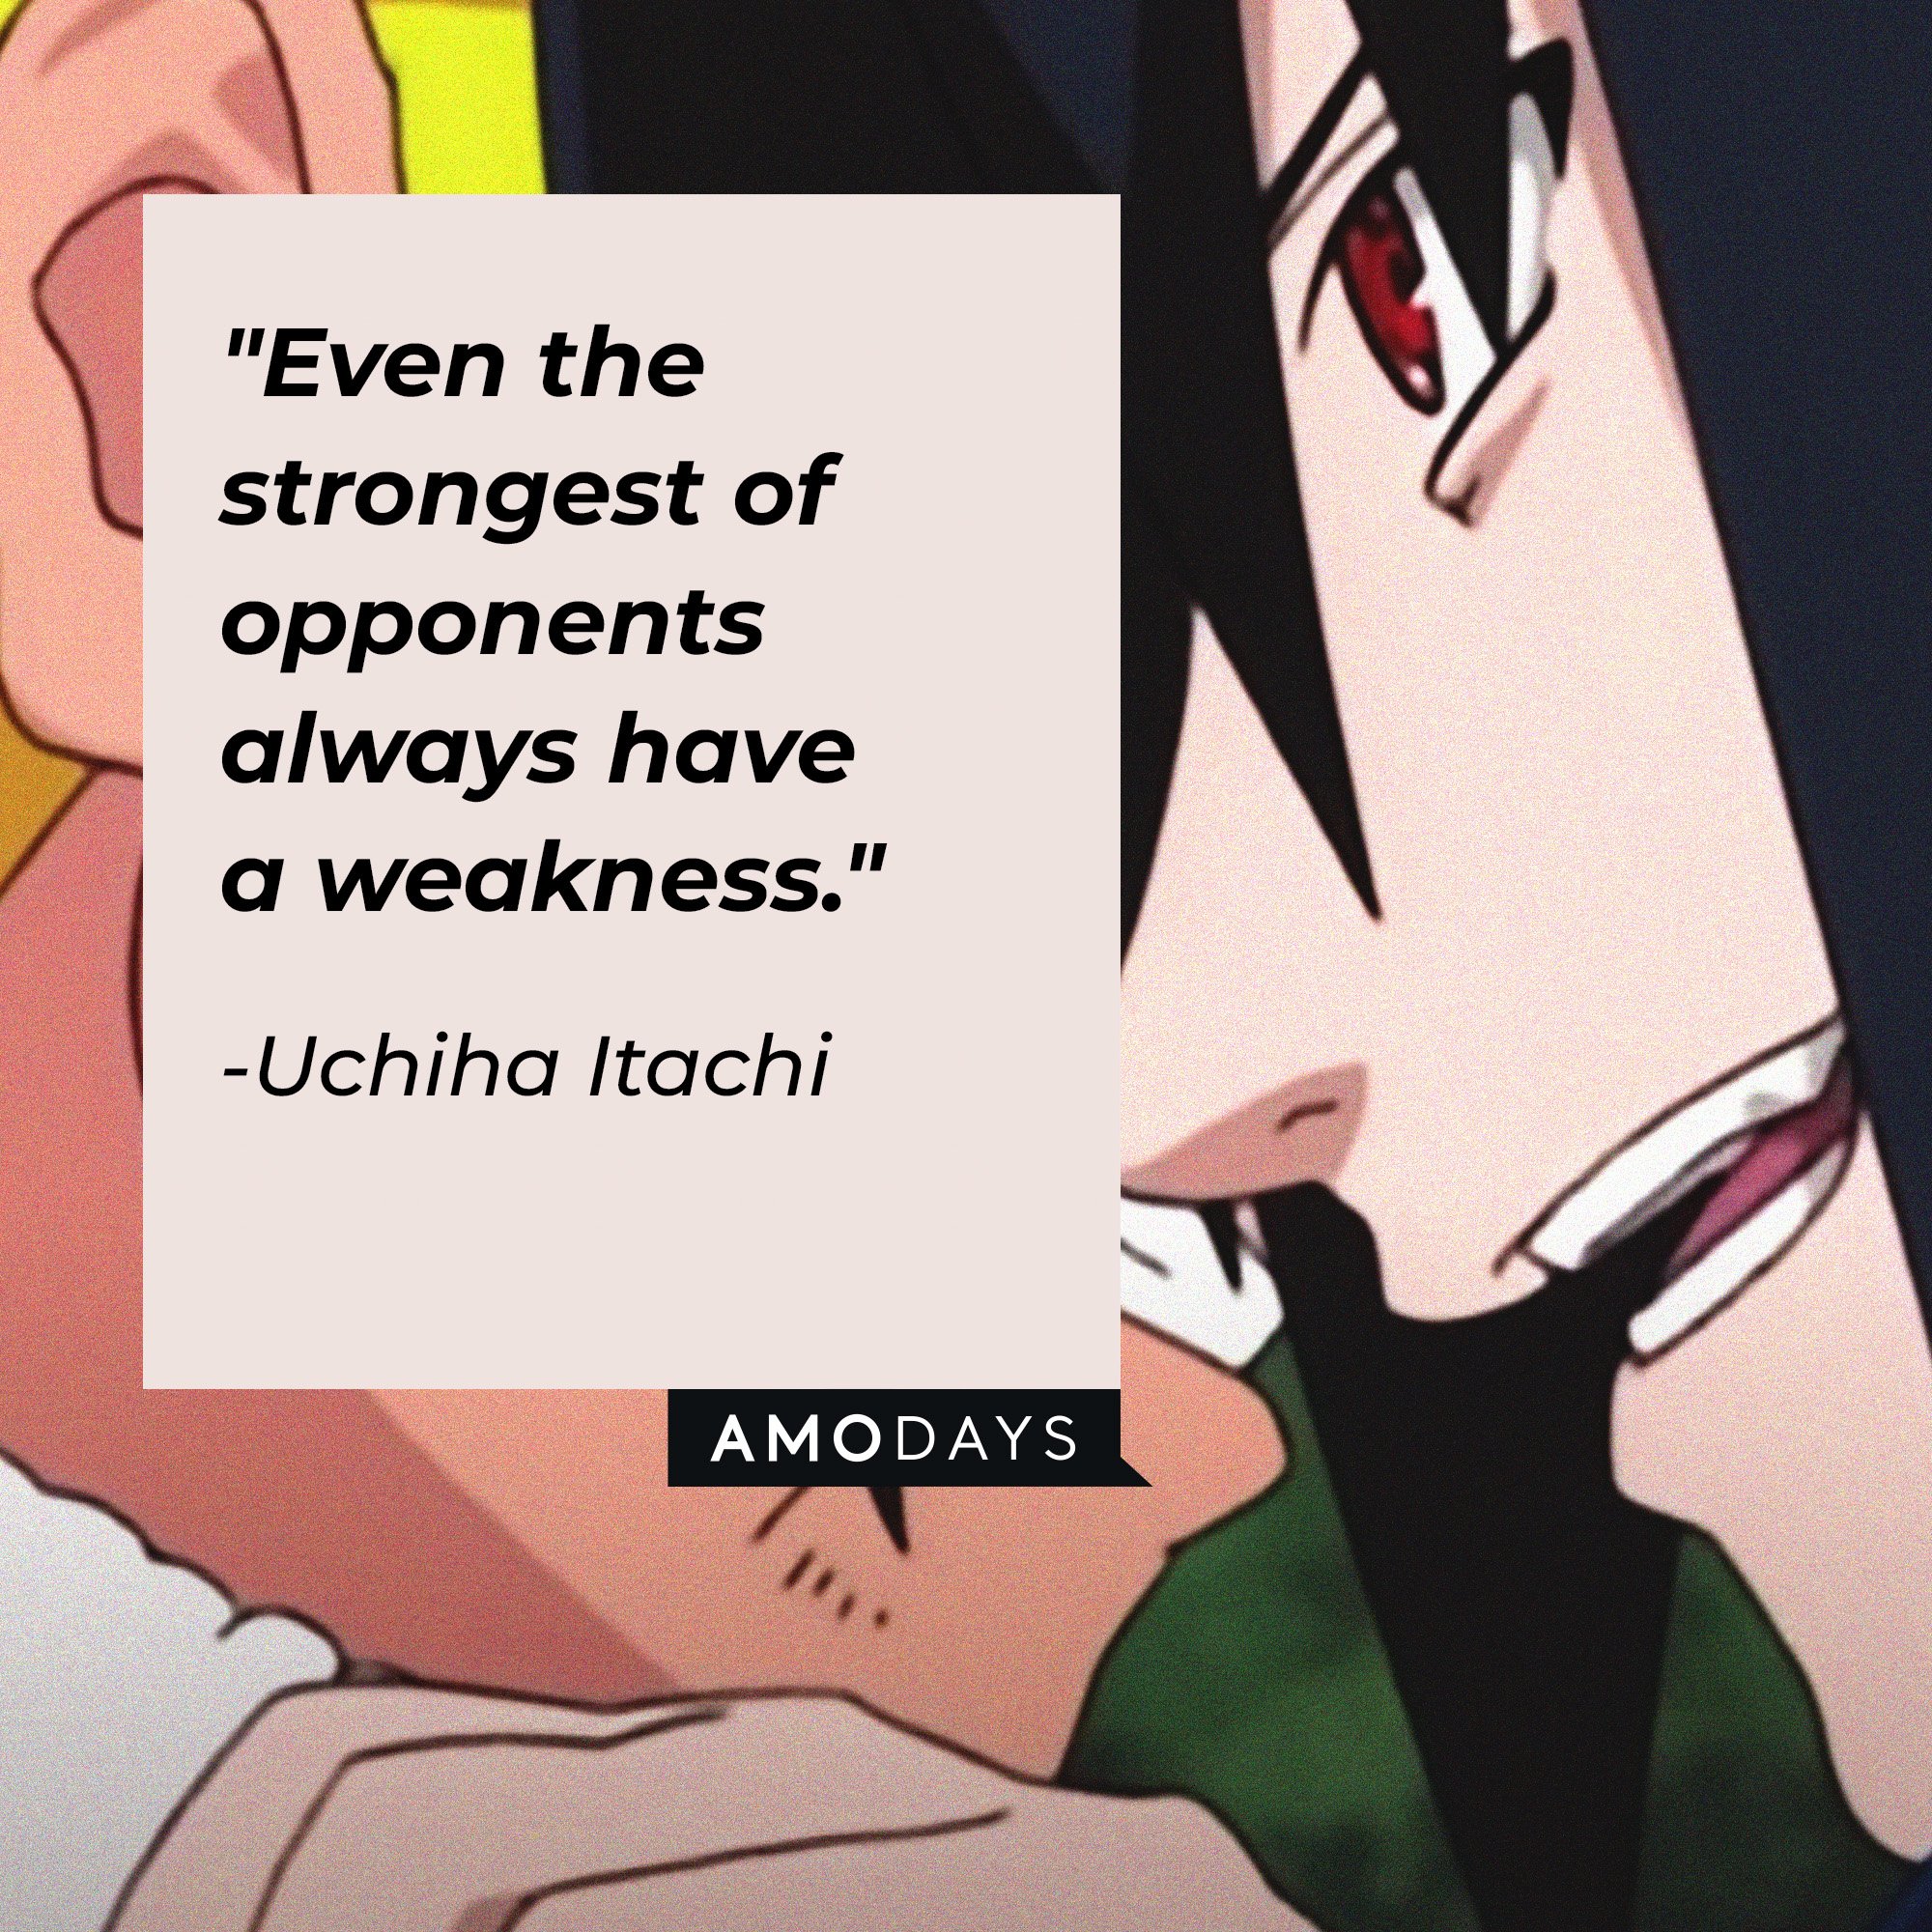 Uchiha Itachi 's quote: "Even the strongest of opponents always have a weakness." | Image: AmoDays